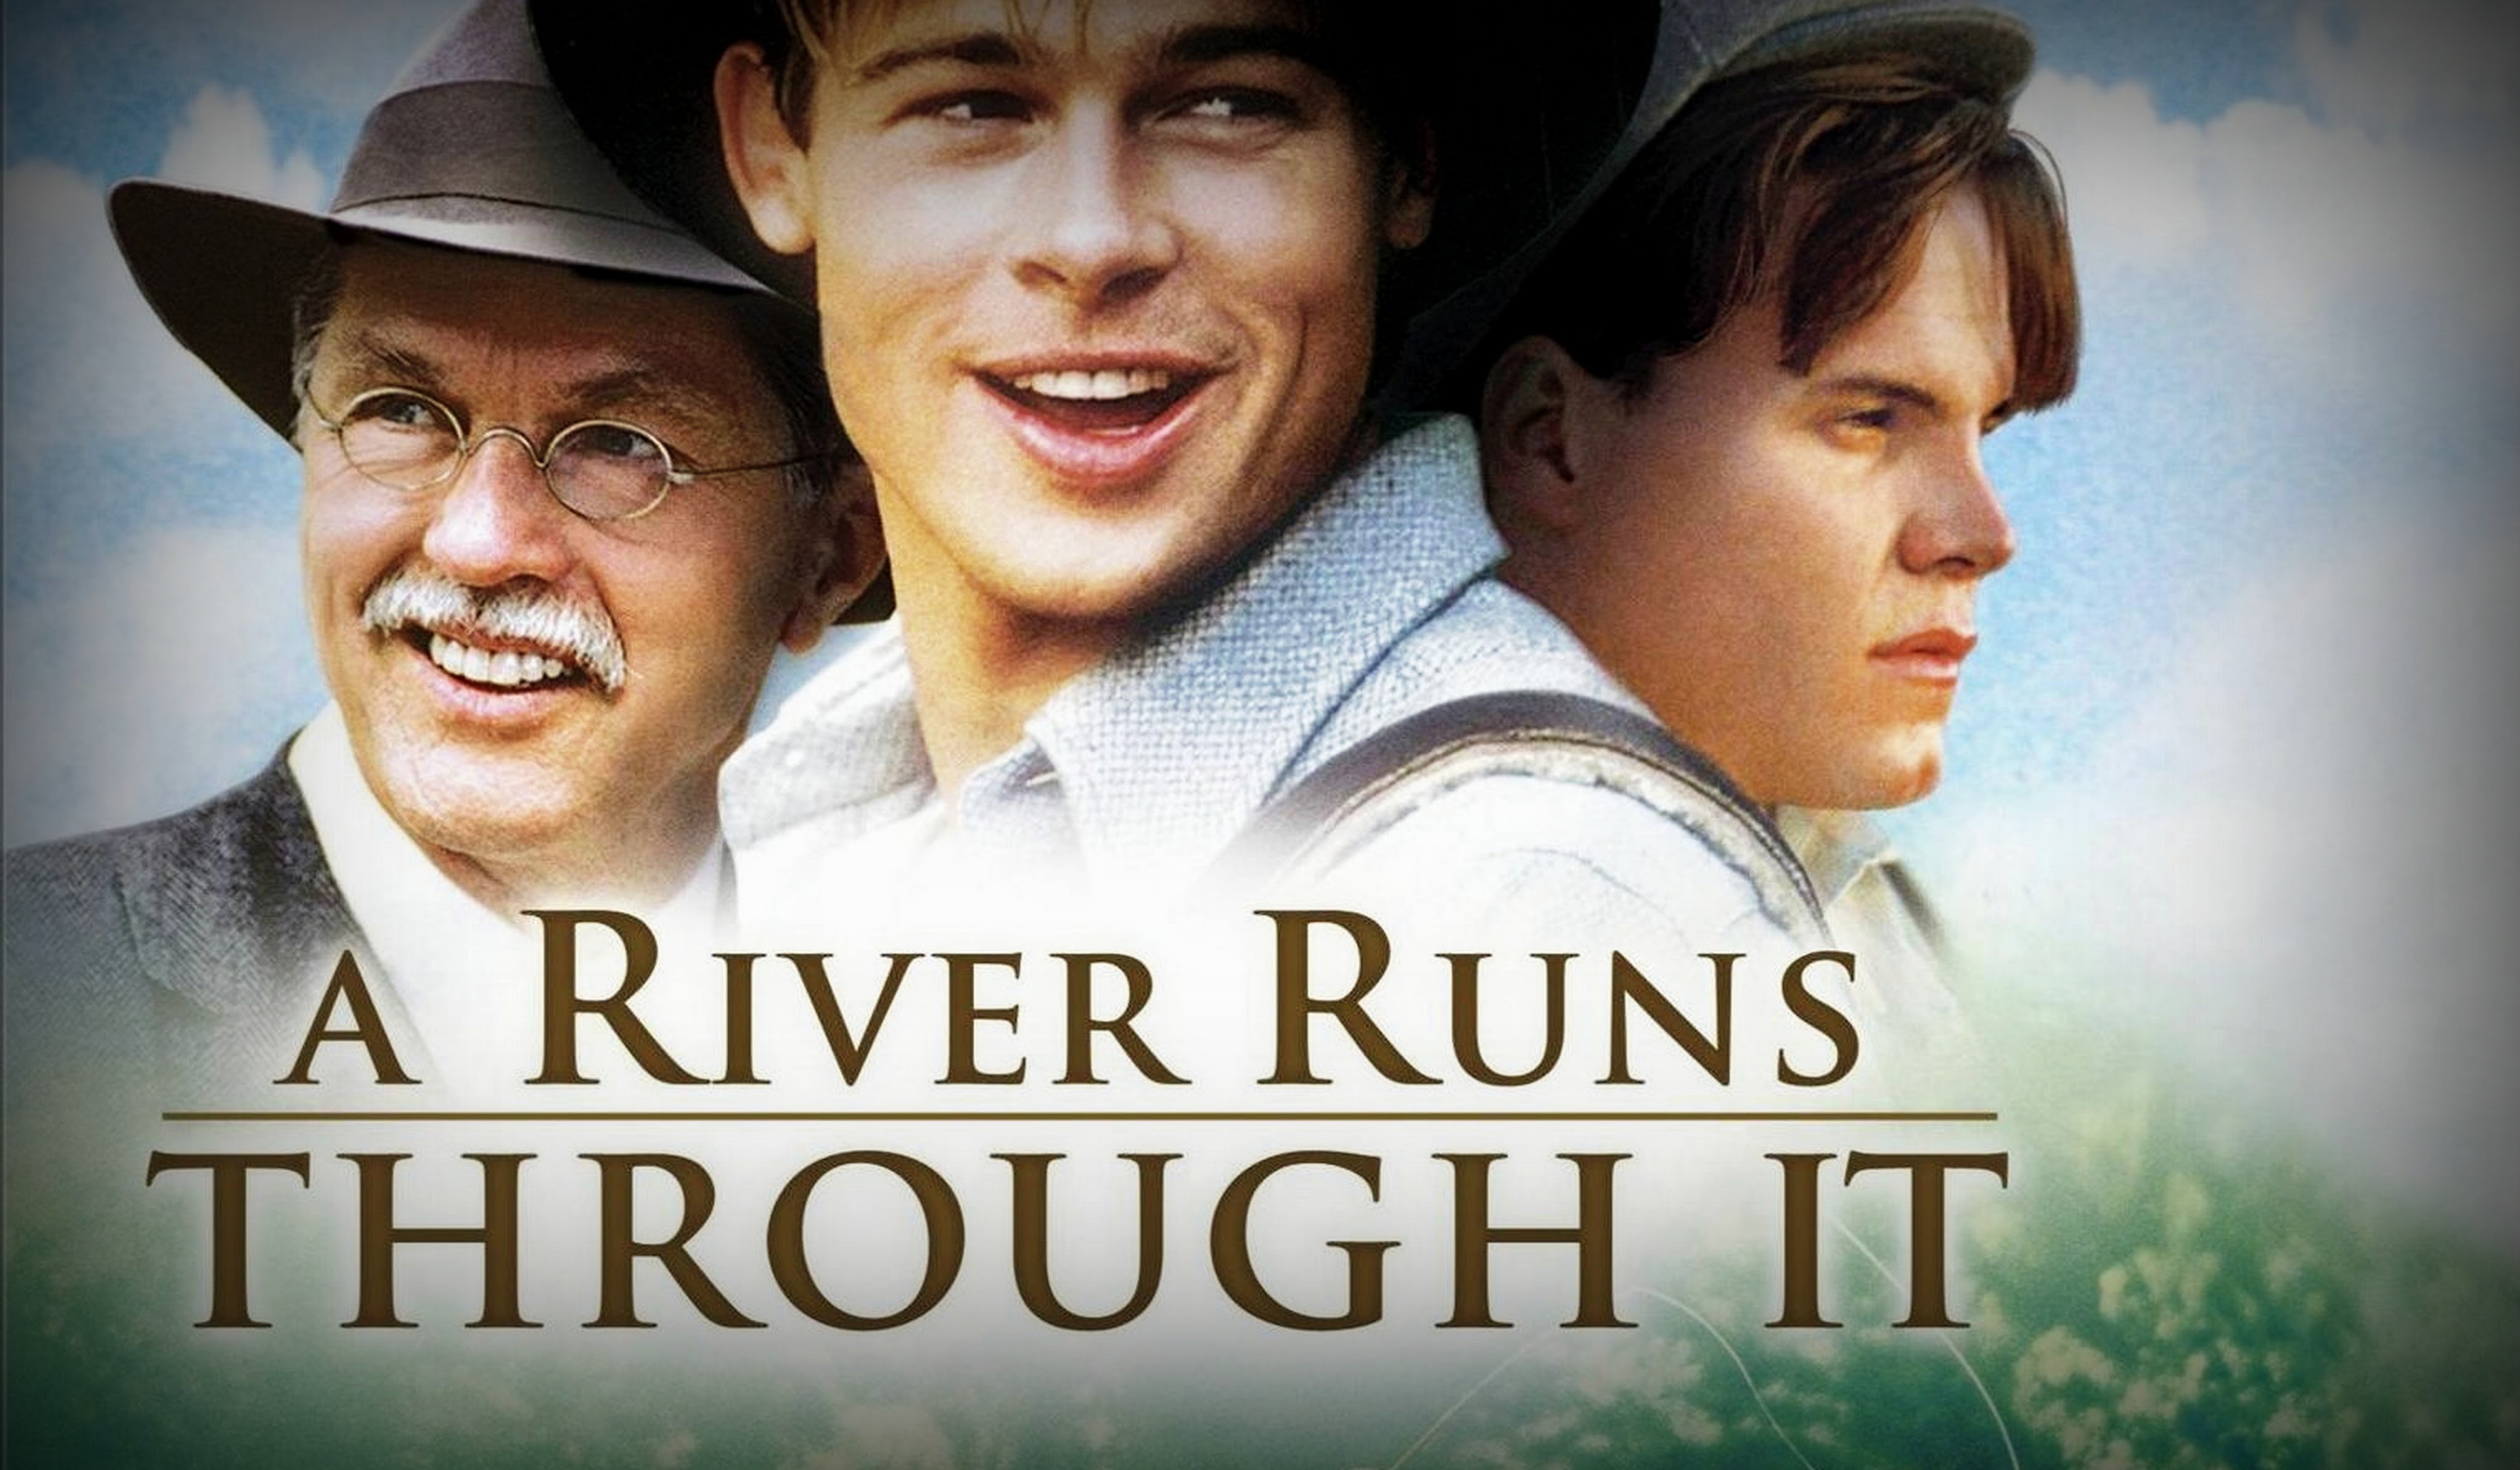 A River Runs Through It (1992) – The Story of a Family